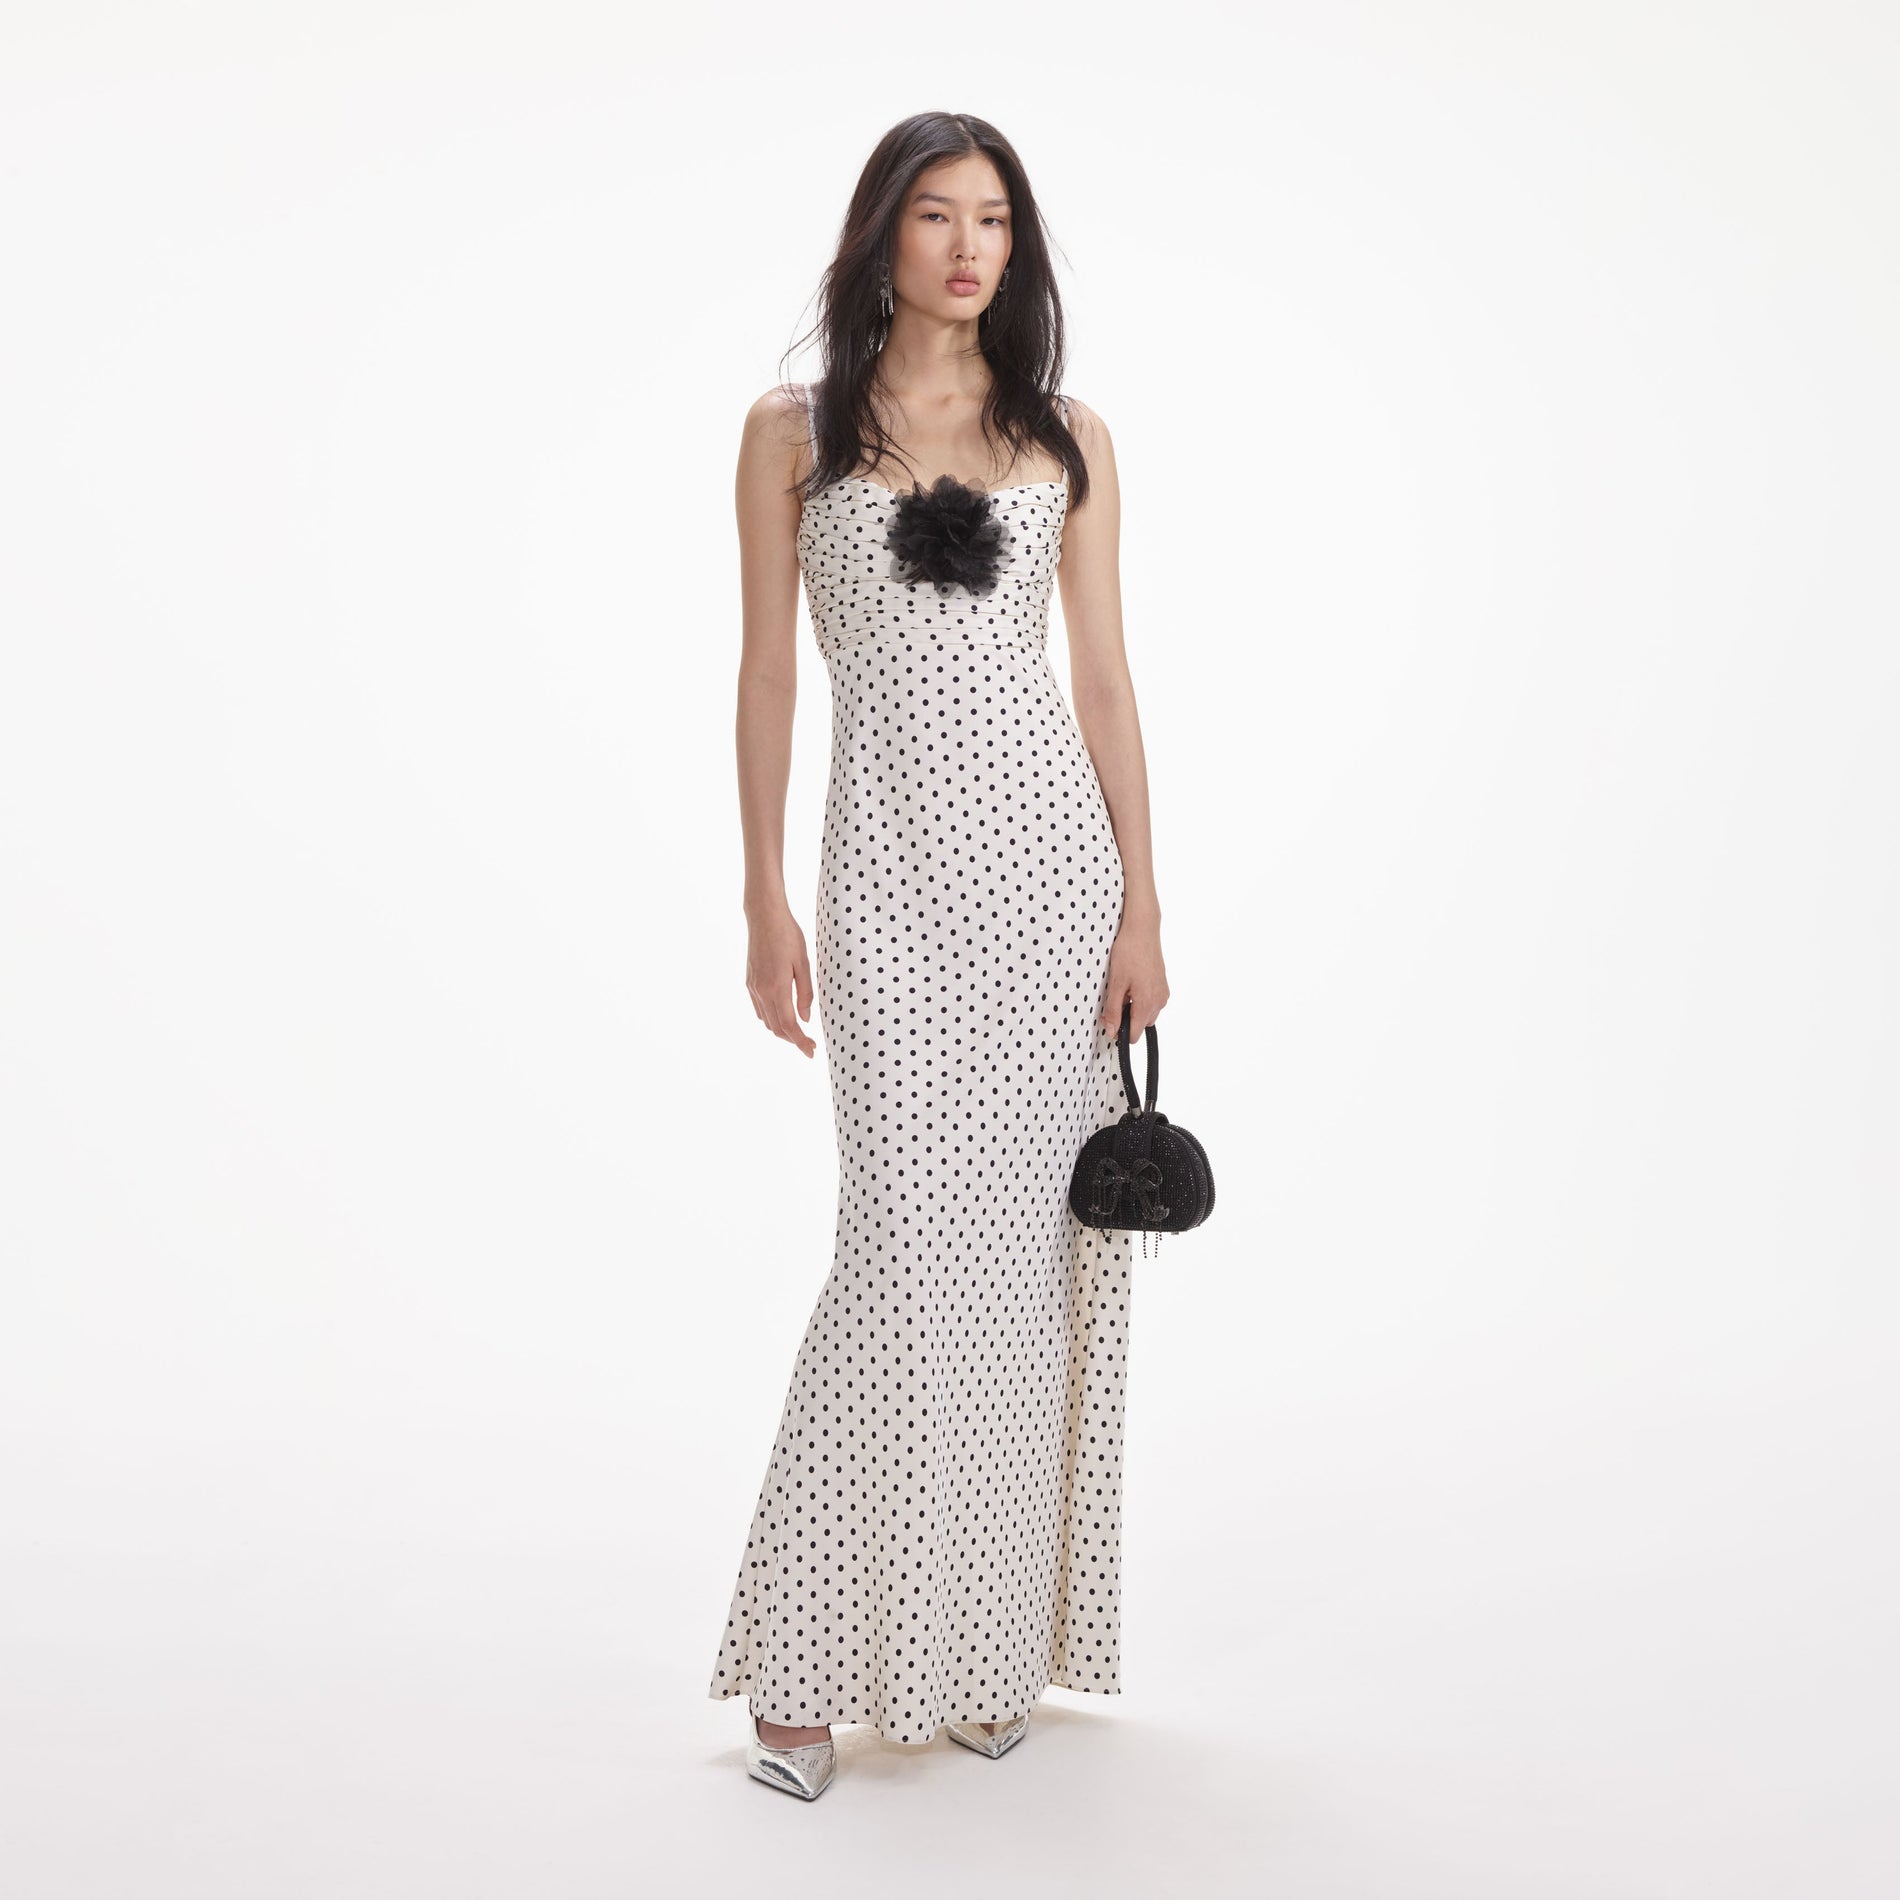 Front view of a woman wearing the Cream Polka Dot Satin Maxi Dress